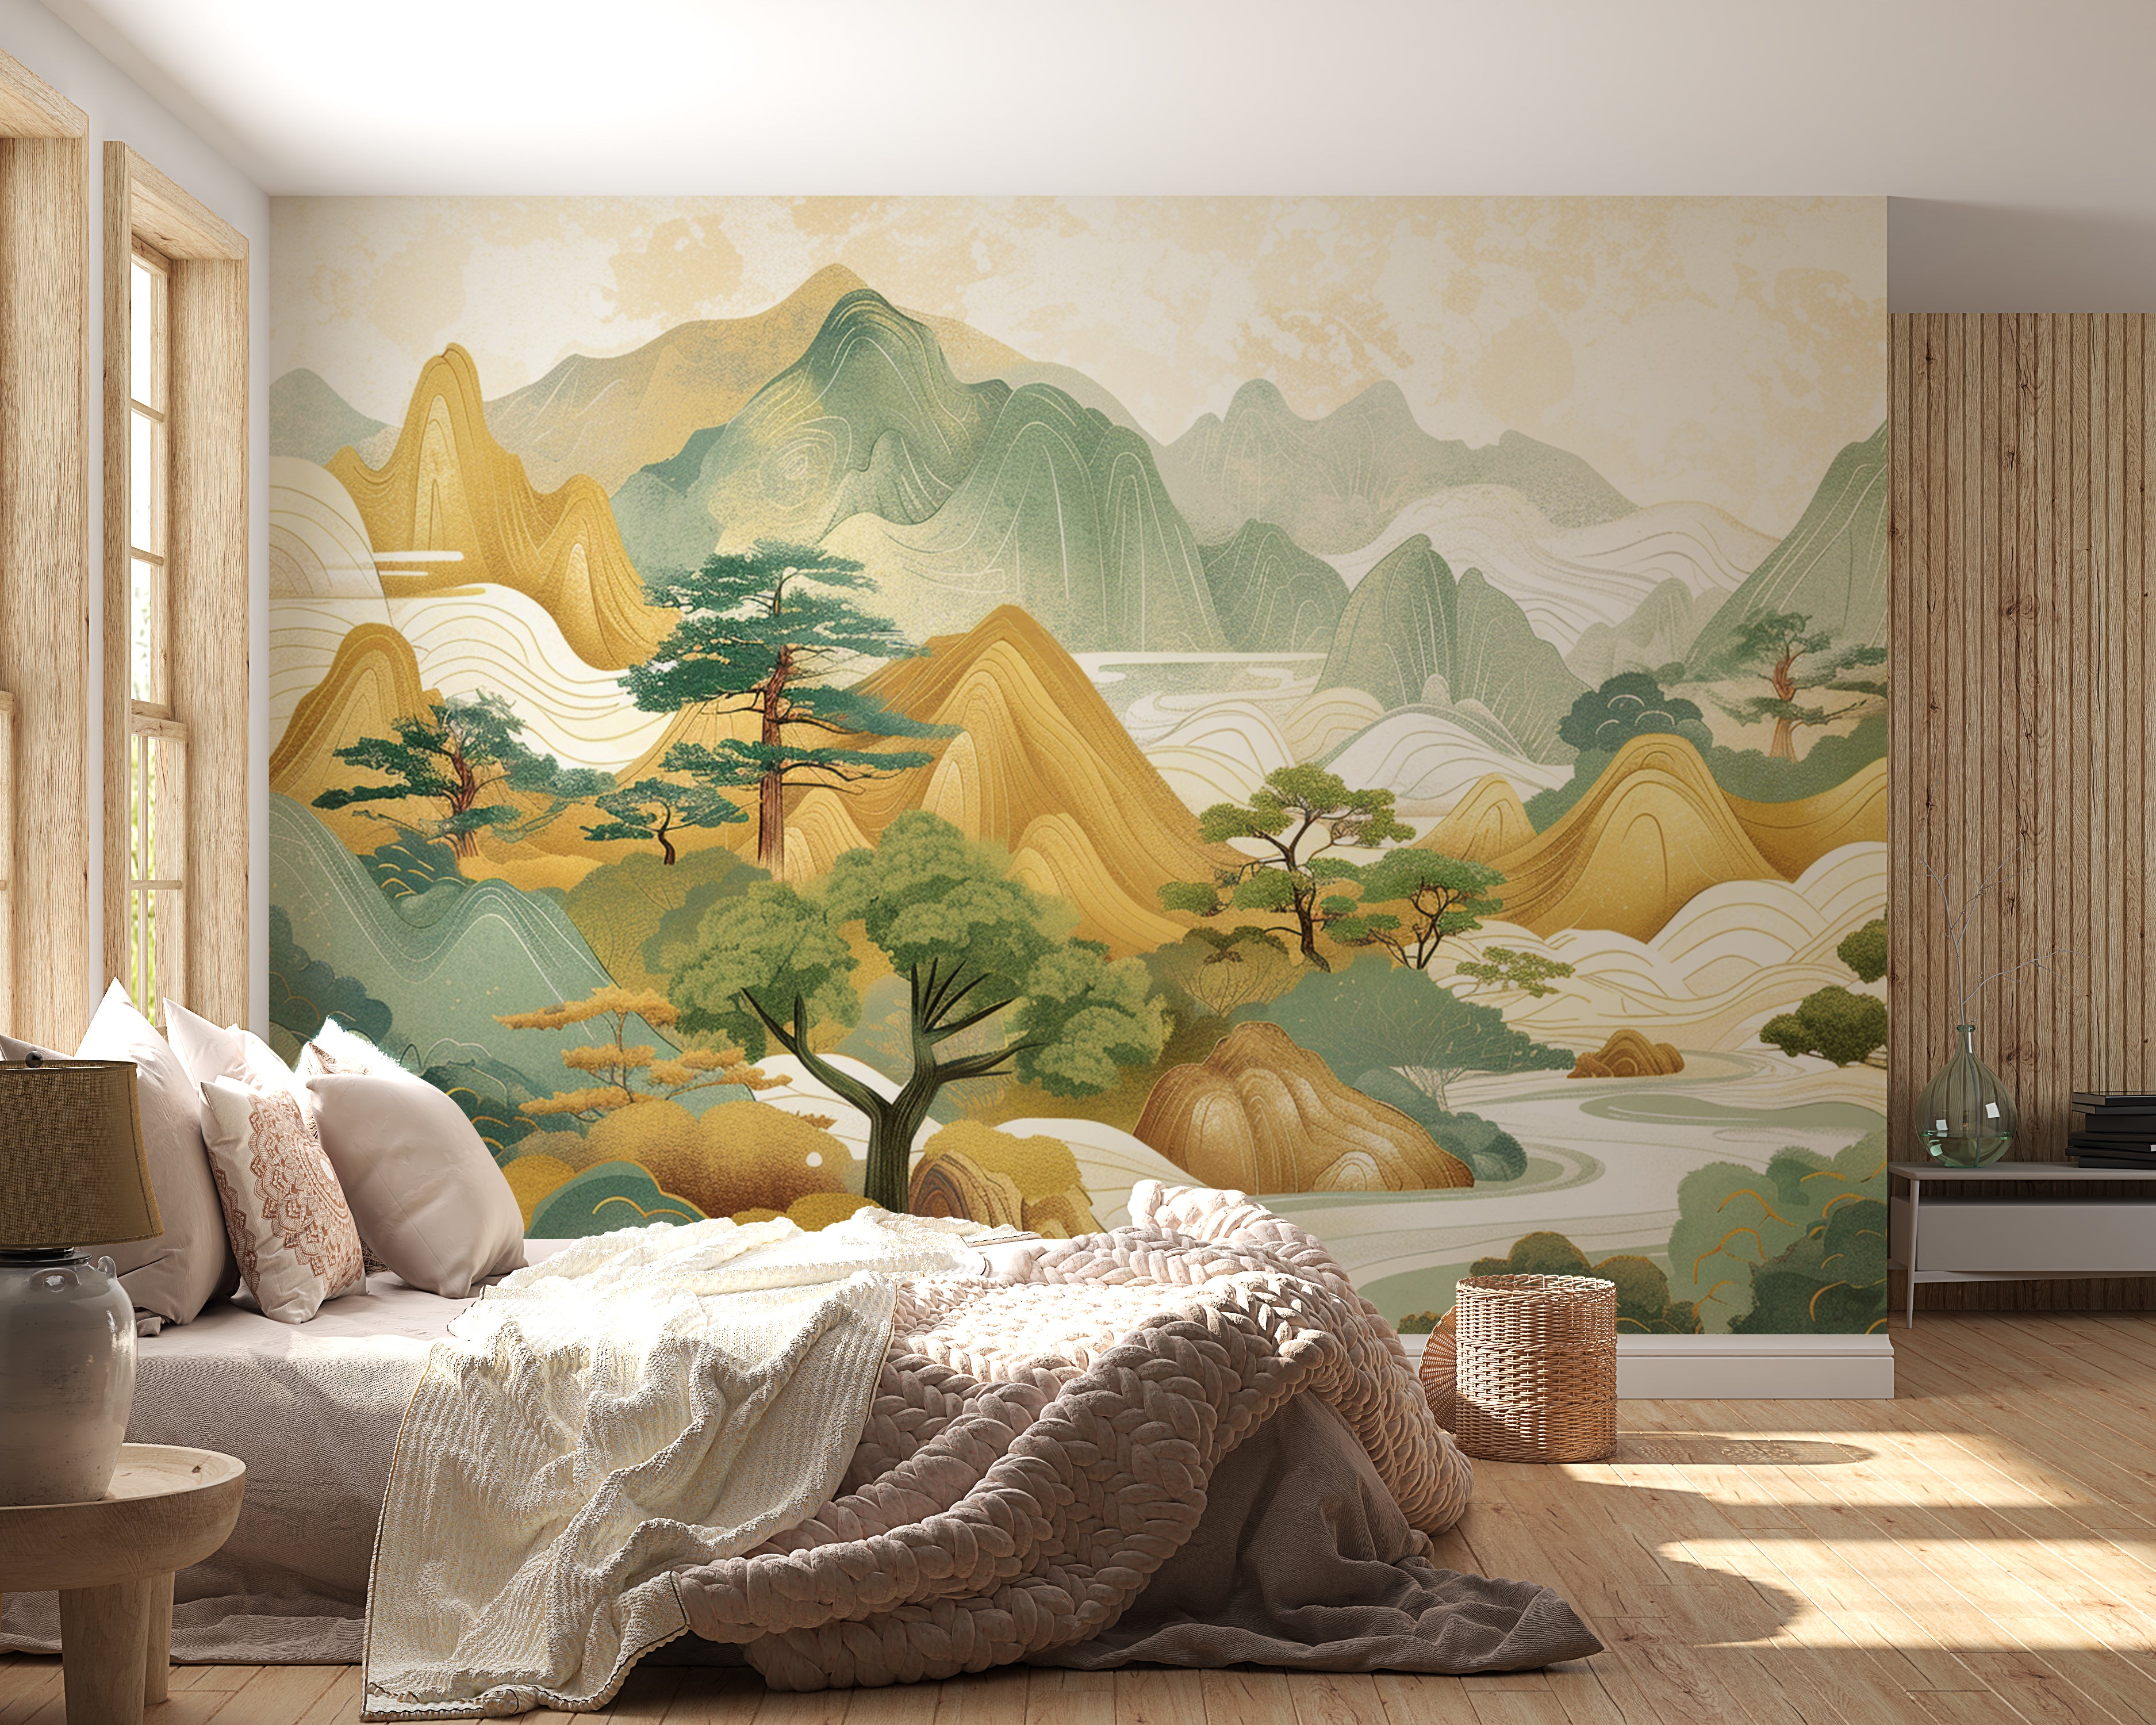 Tranquility of Asia: Wall Panorama of Enchanted Hills